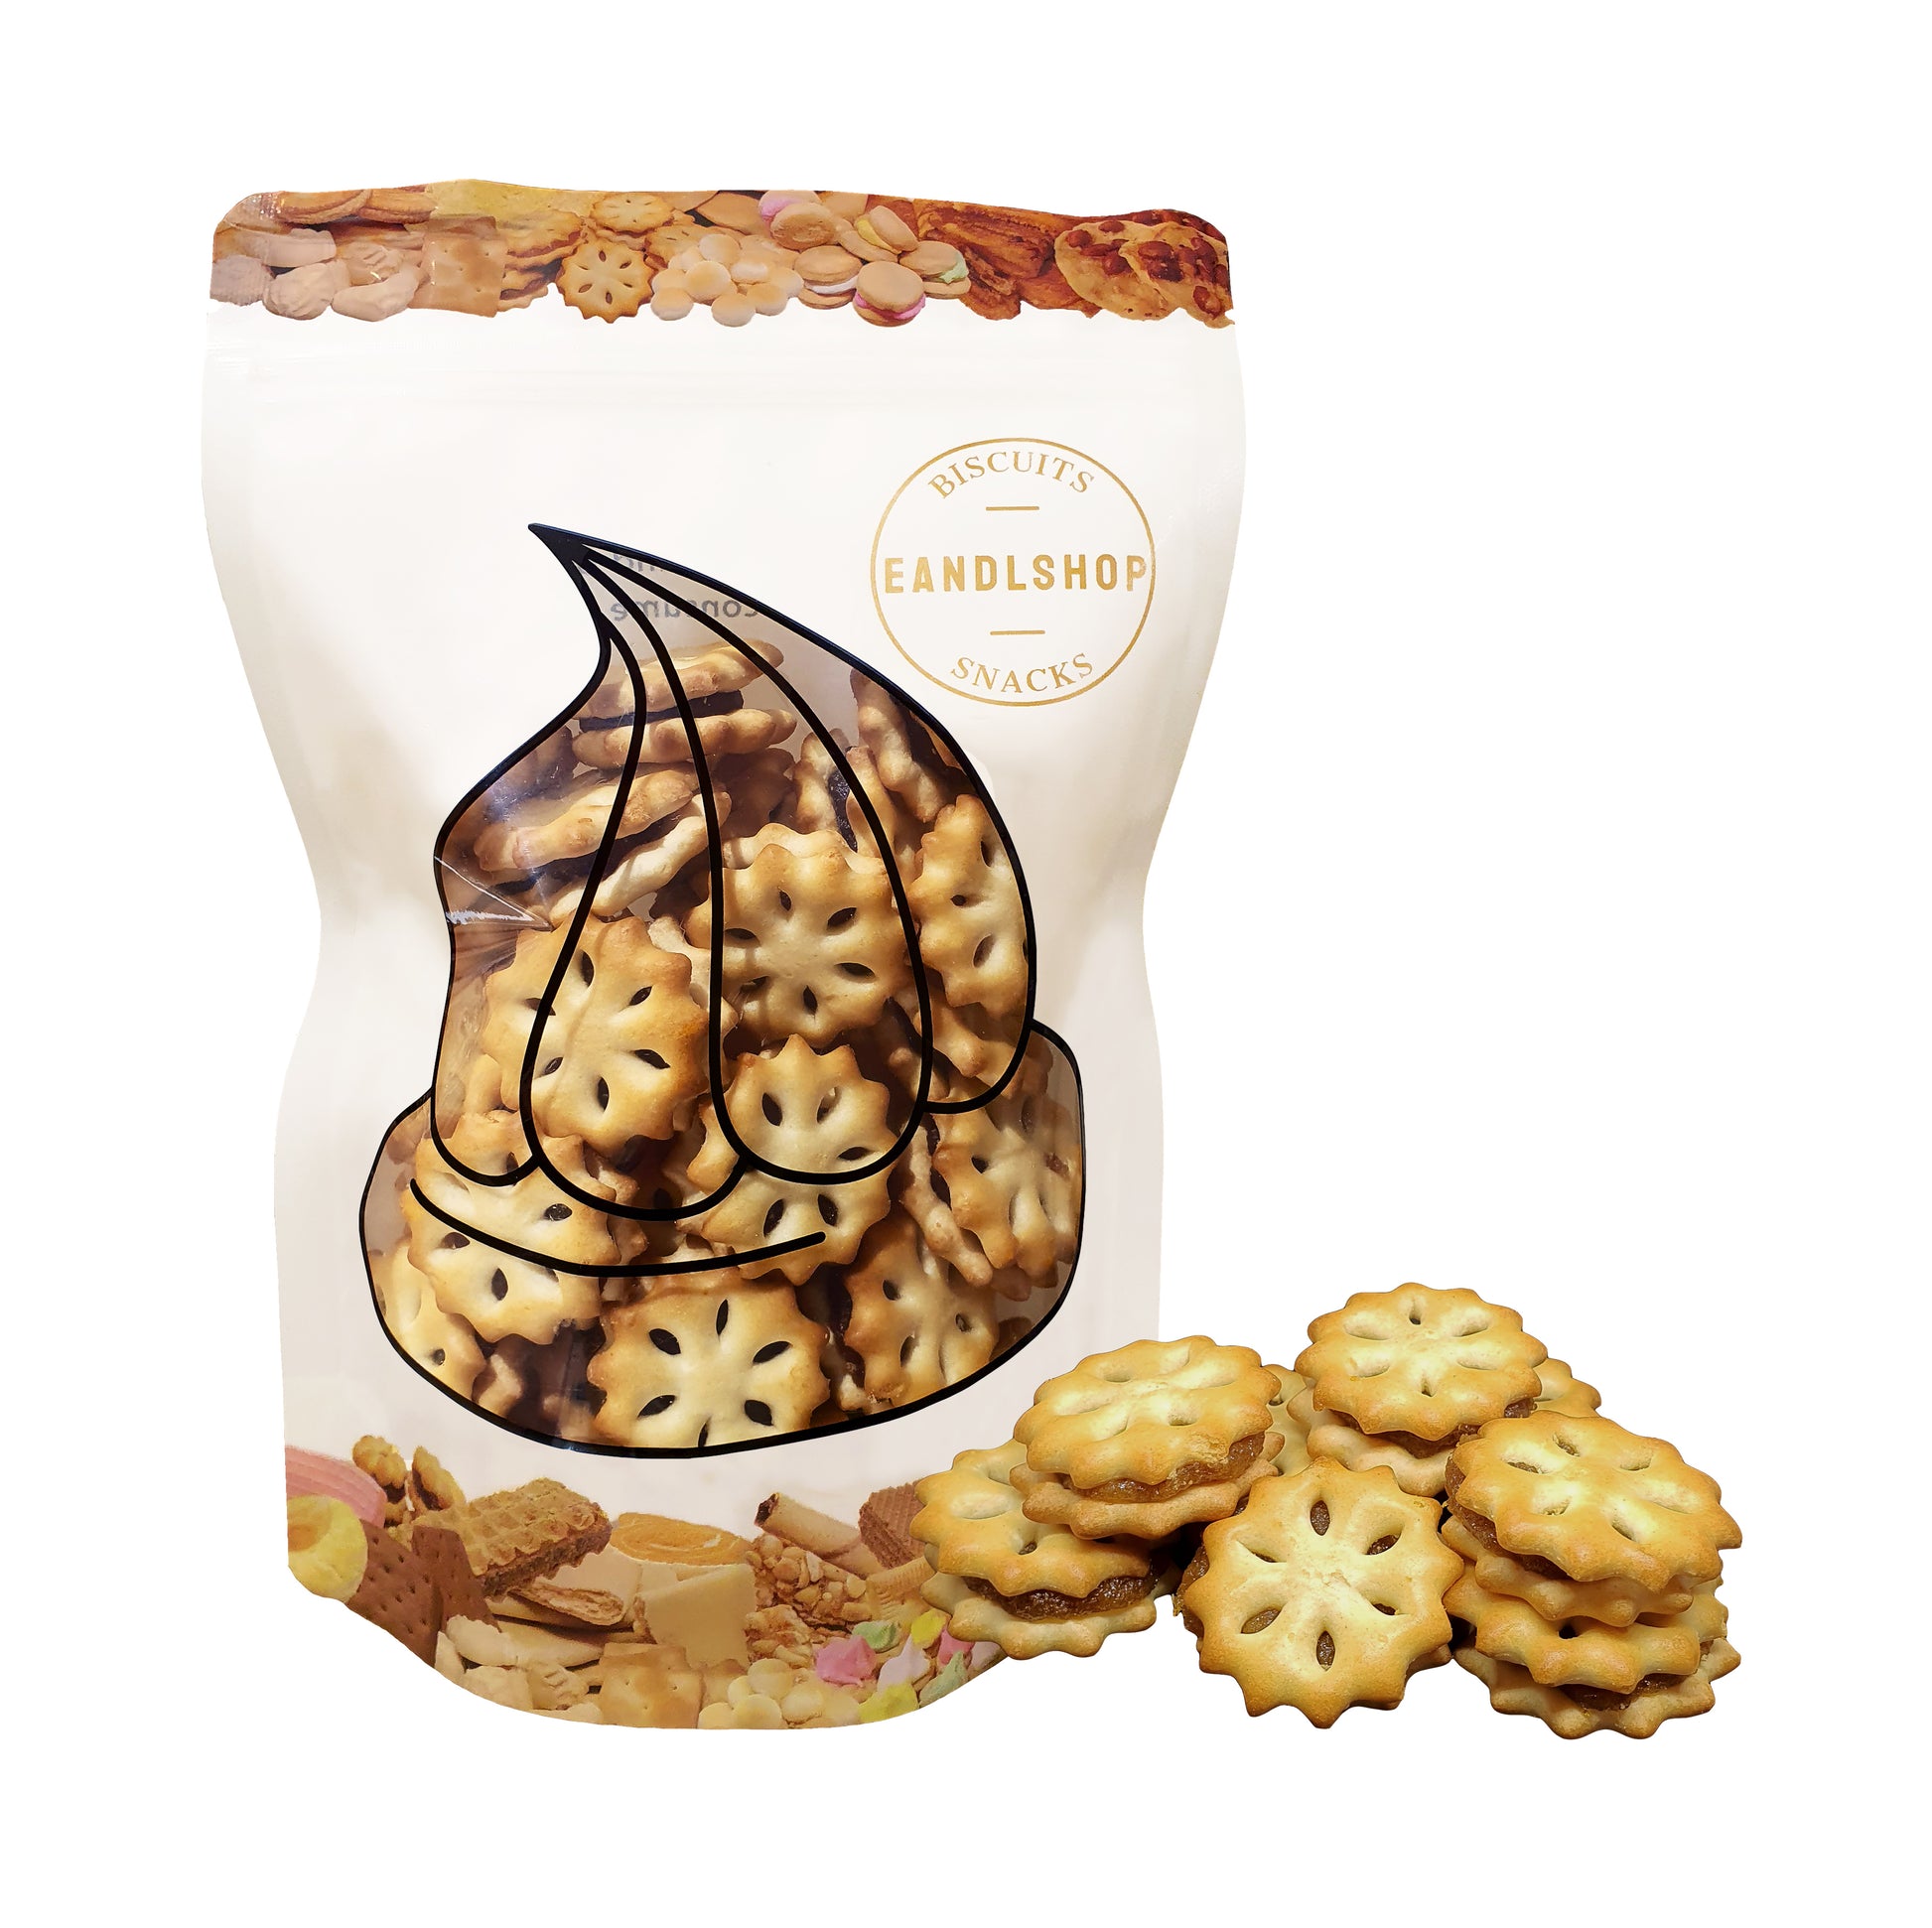 Mini Golden Pineapple biscuit. Old-school biscuits, modern snacks (chips, crackers), cakes, gummies, plums, dried fruits, nuts, herbal tea – available at www.EANDLSHOP.com